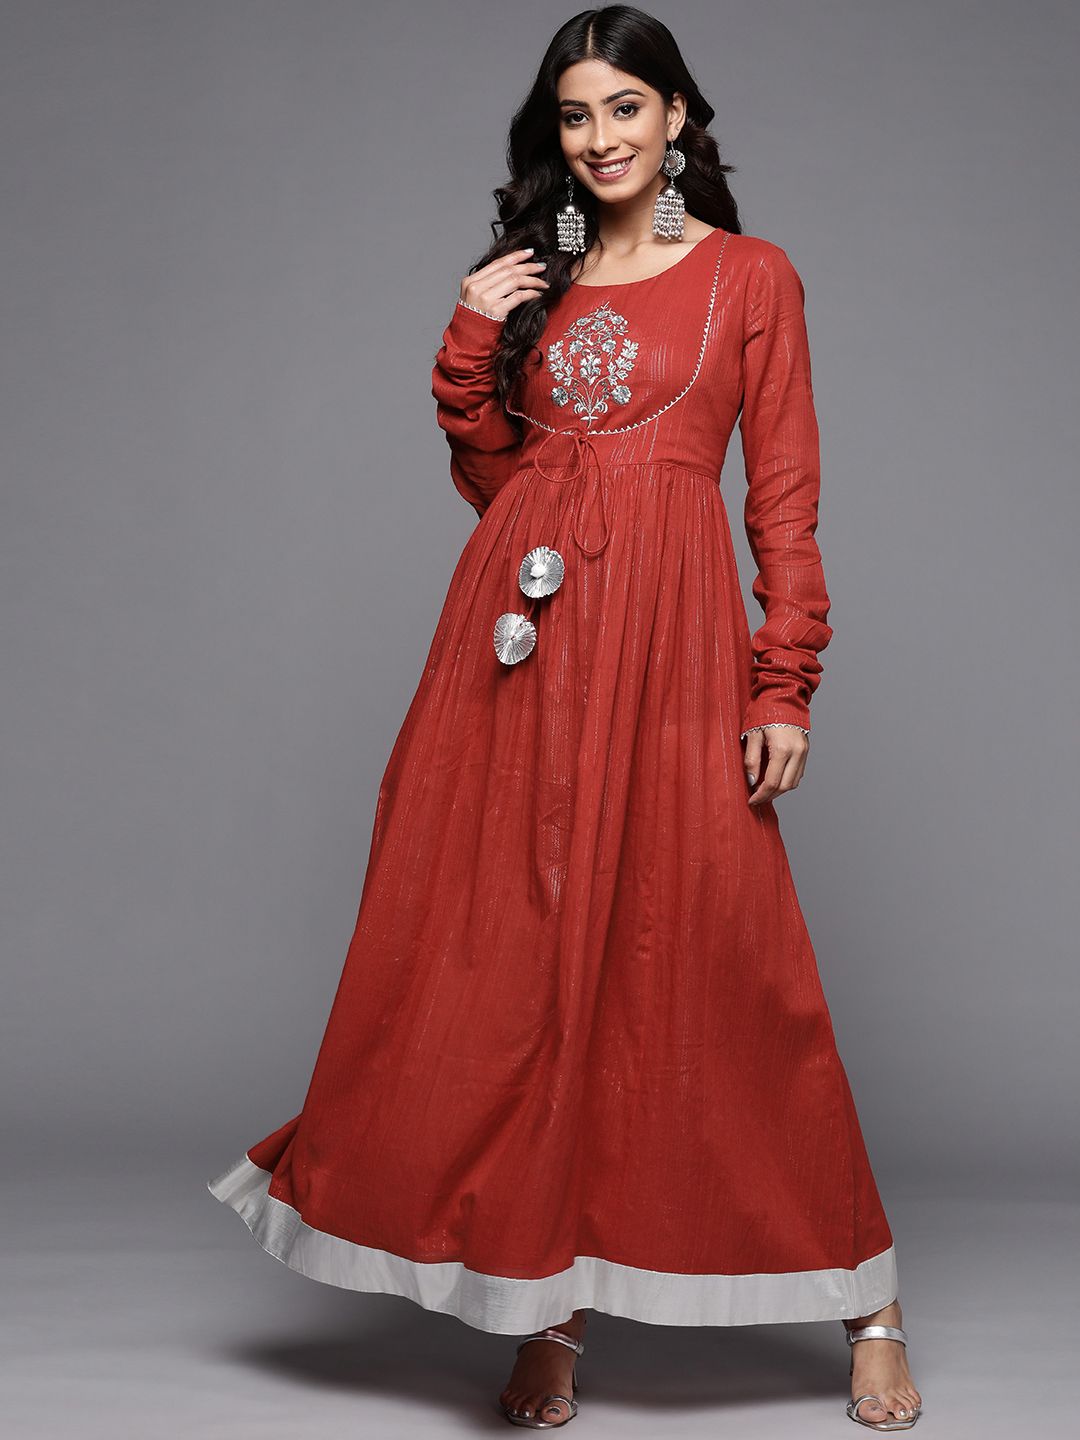 Varanga Red & Silver Embroidered A-Line Maxi Dress Price in India